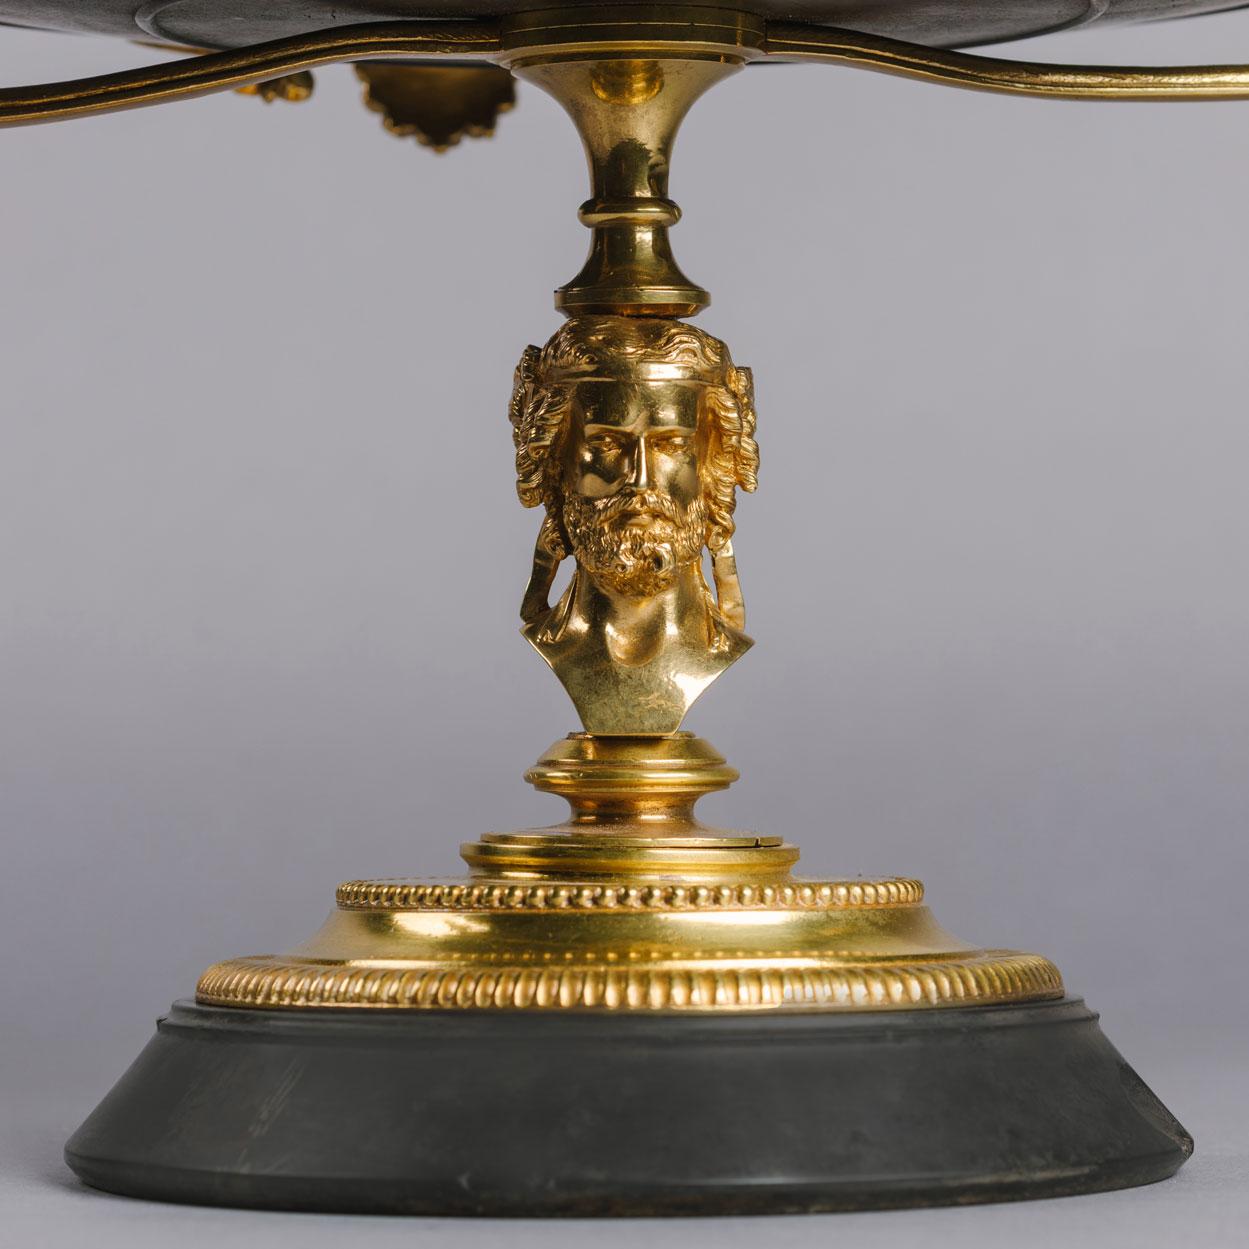 Fine Neoclassical Revival Gilt and Patinated Bronze Tazza In Good Condition For Sale In Brighton, West Sussex